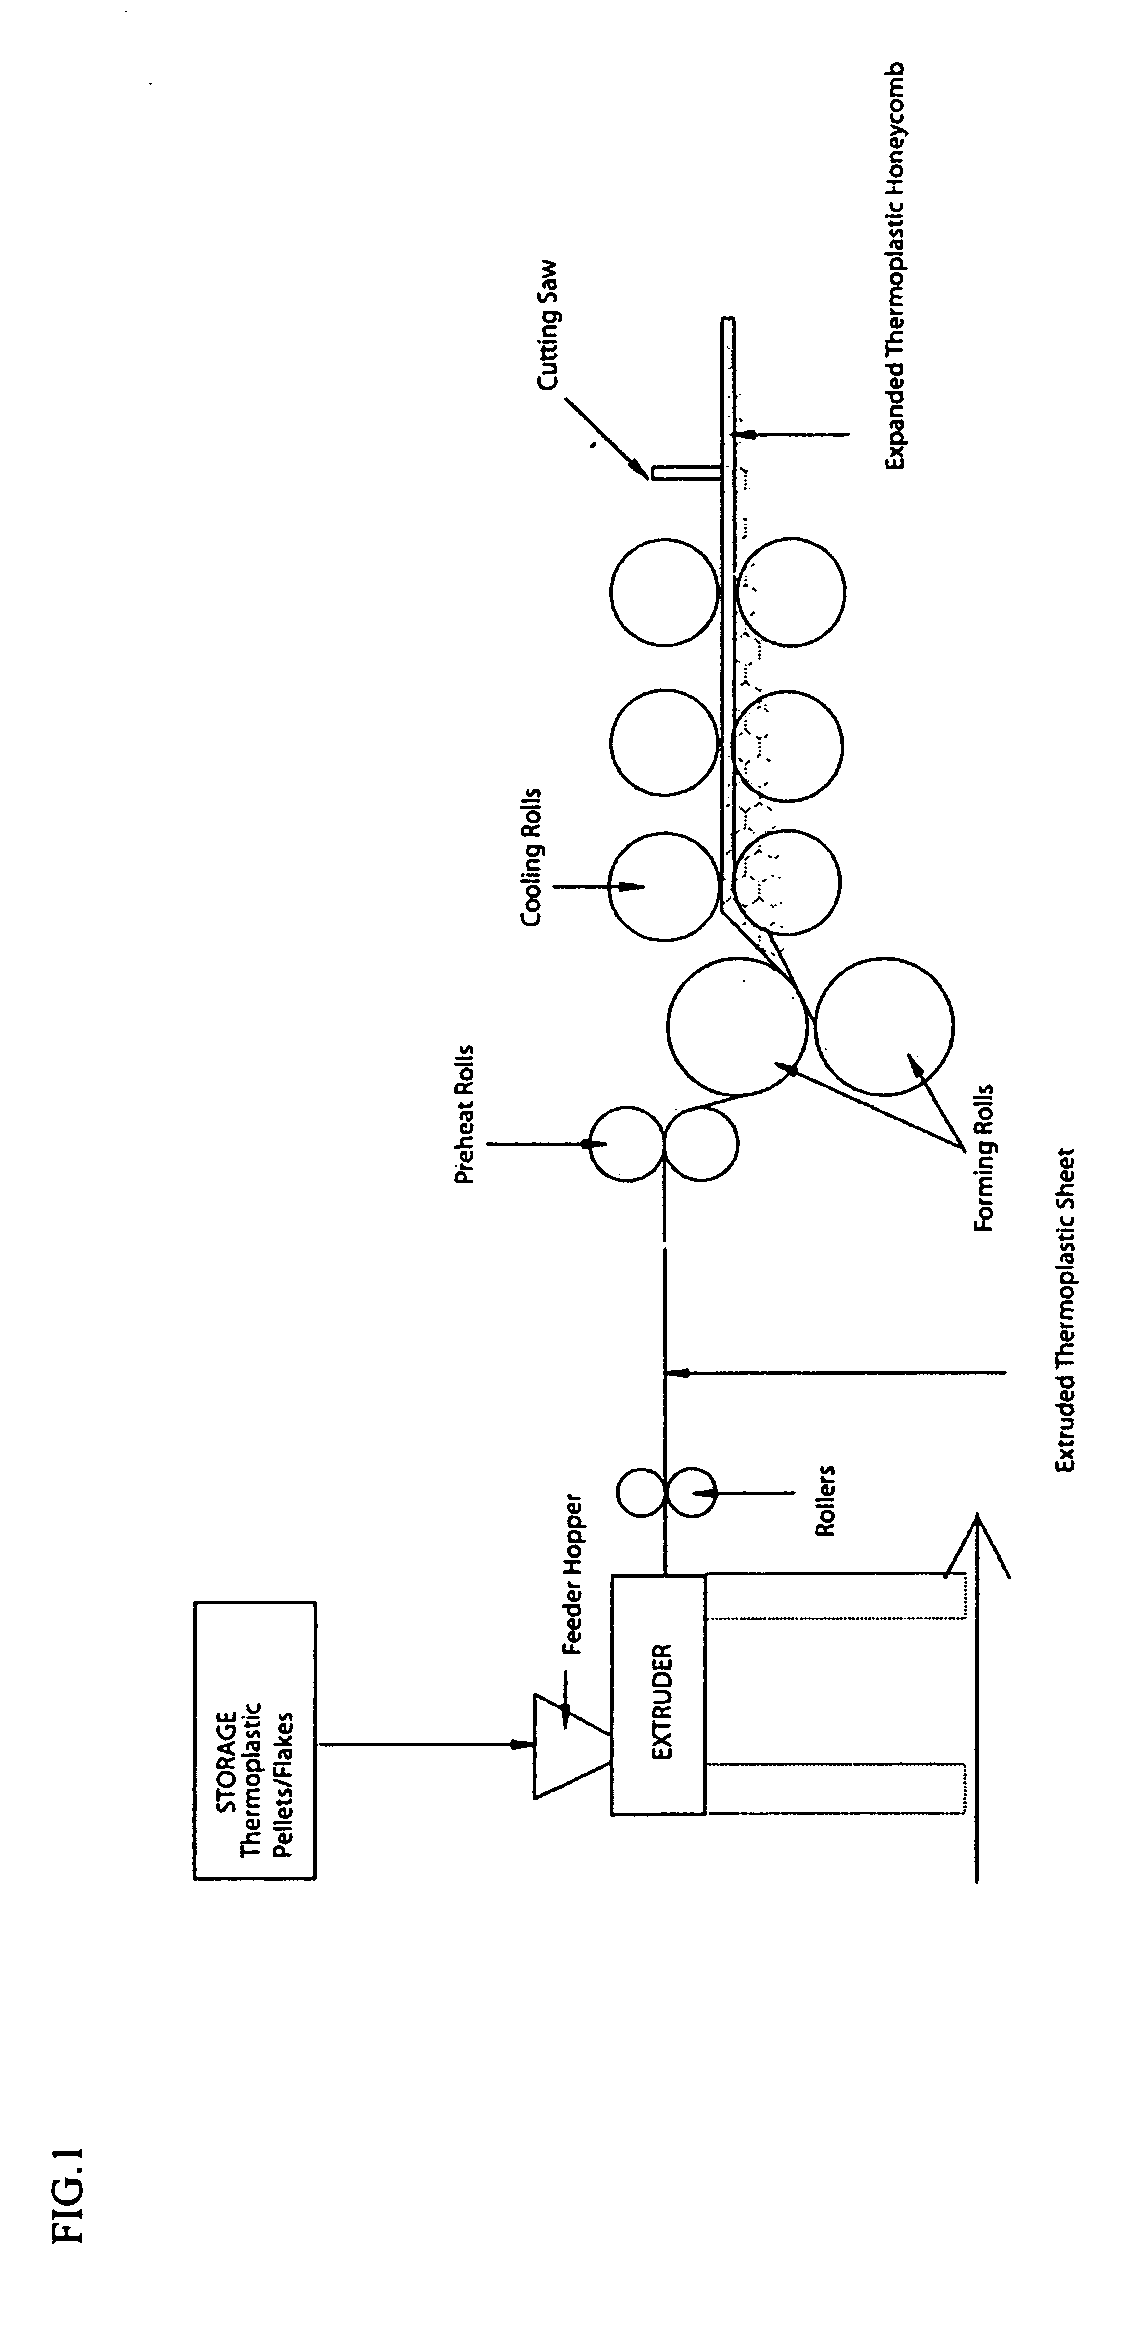 Advanced method and apparatus for cost-effectively and continuously producing expanded thermoformable honeycomb materials